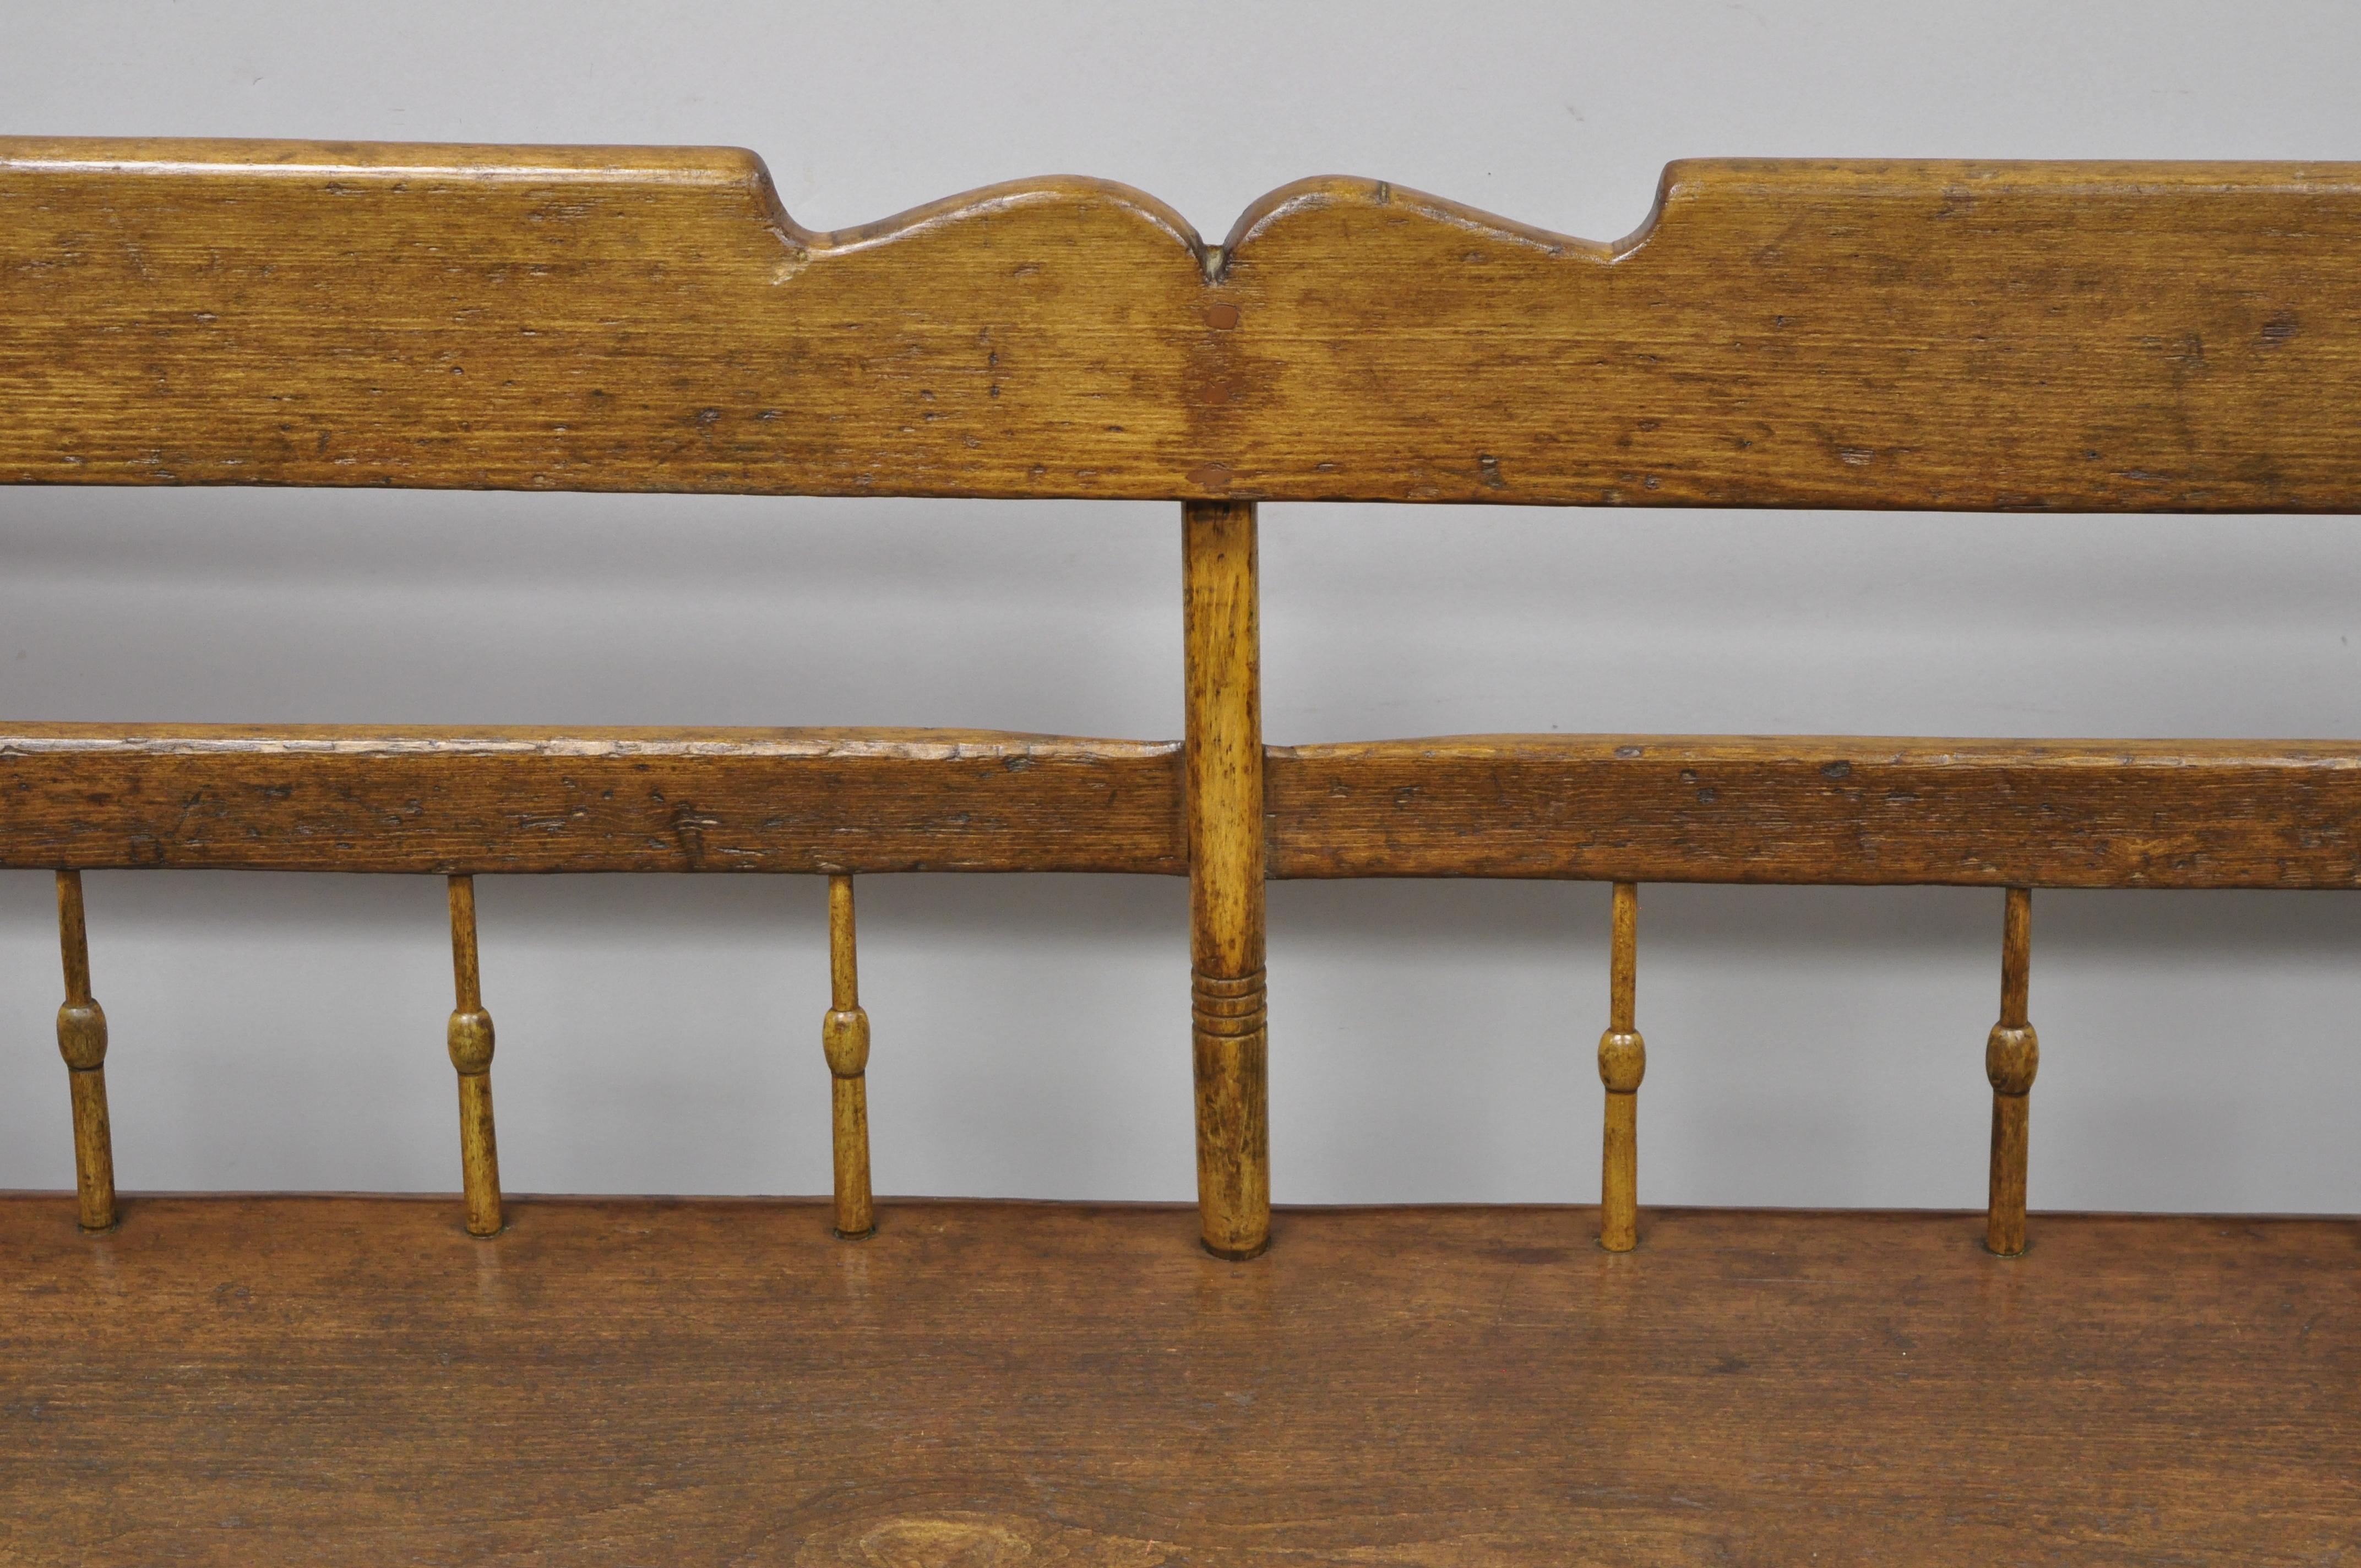 antique wooden benches with backs